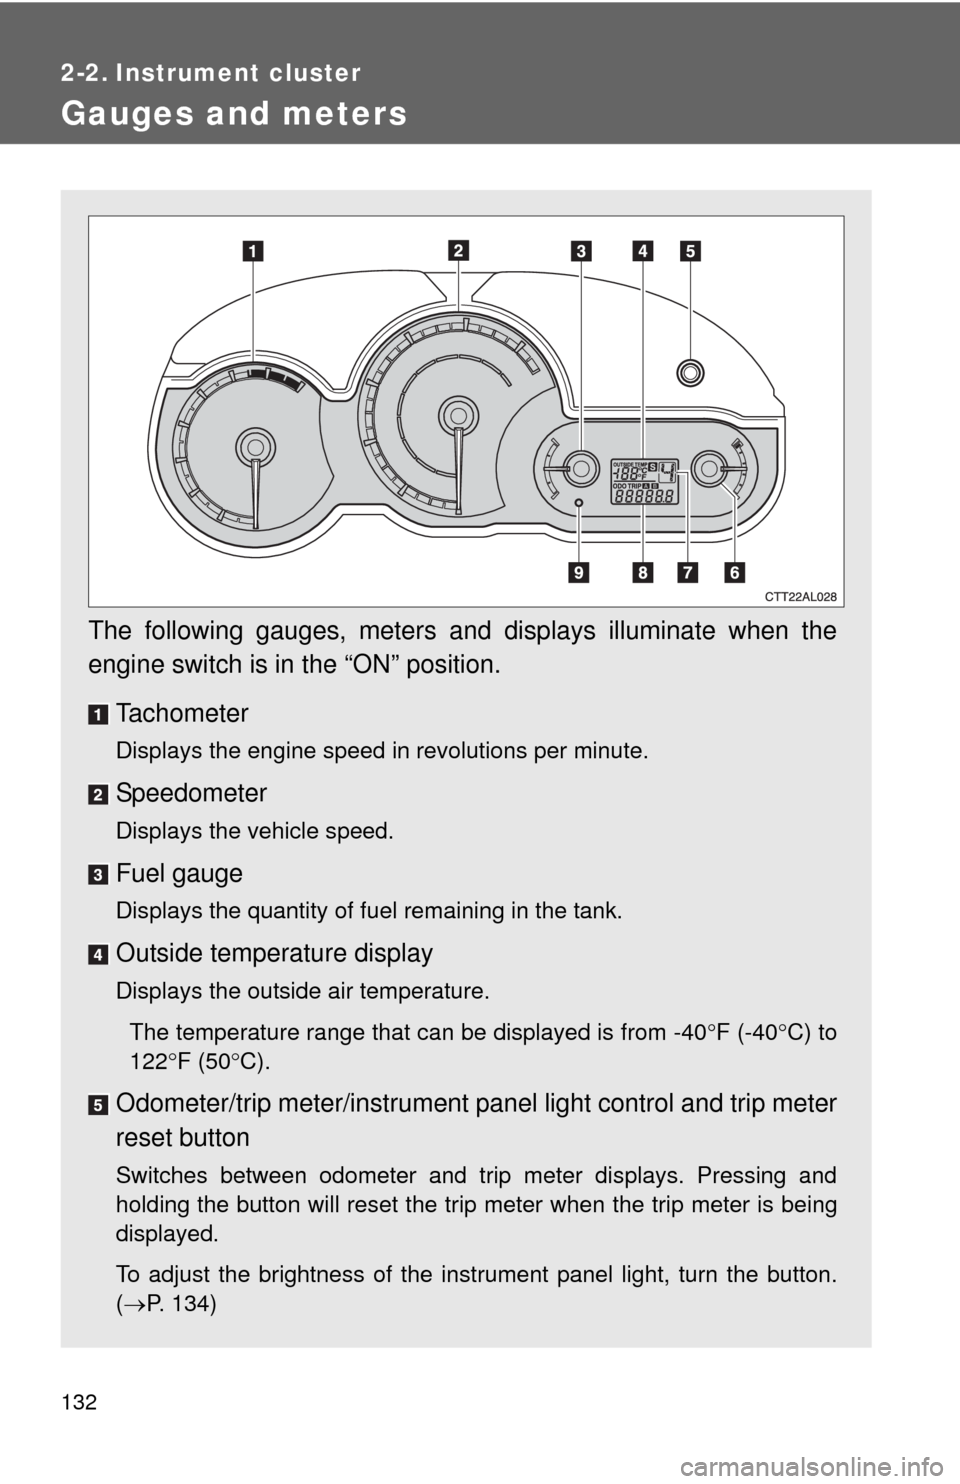 TOYOTA MATRIX 2013 E140 / 2.G Owners Manual 132
2-2. Instrument cluster
Gauges and meters
The following gauges, meters and displays illuminate when the
engine switch is in the “ON” position.
Tachometer
Displays the engine speed in revolutio